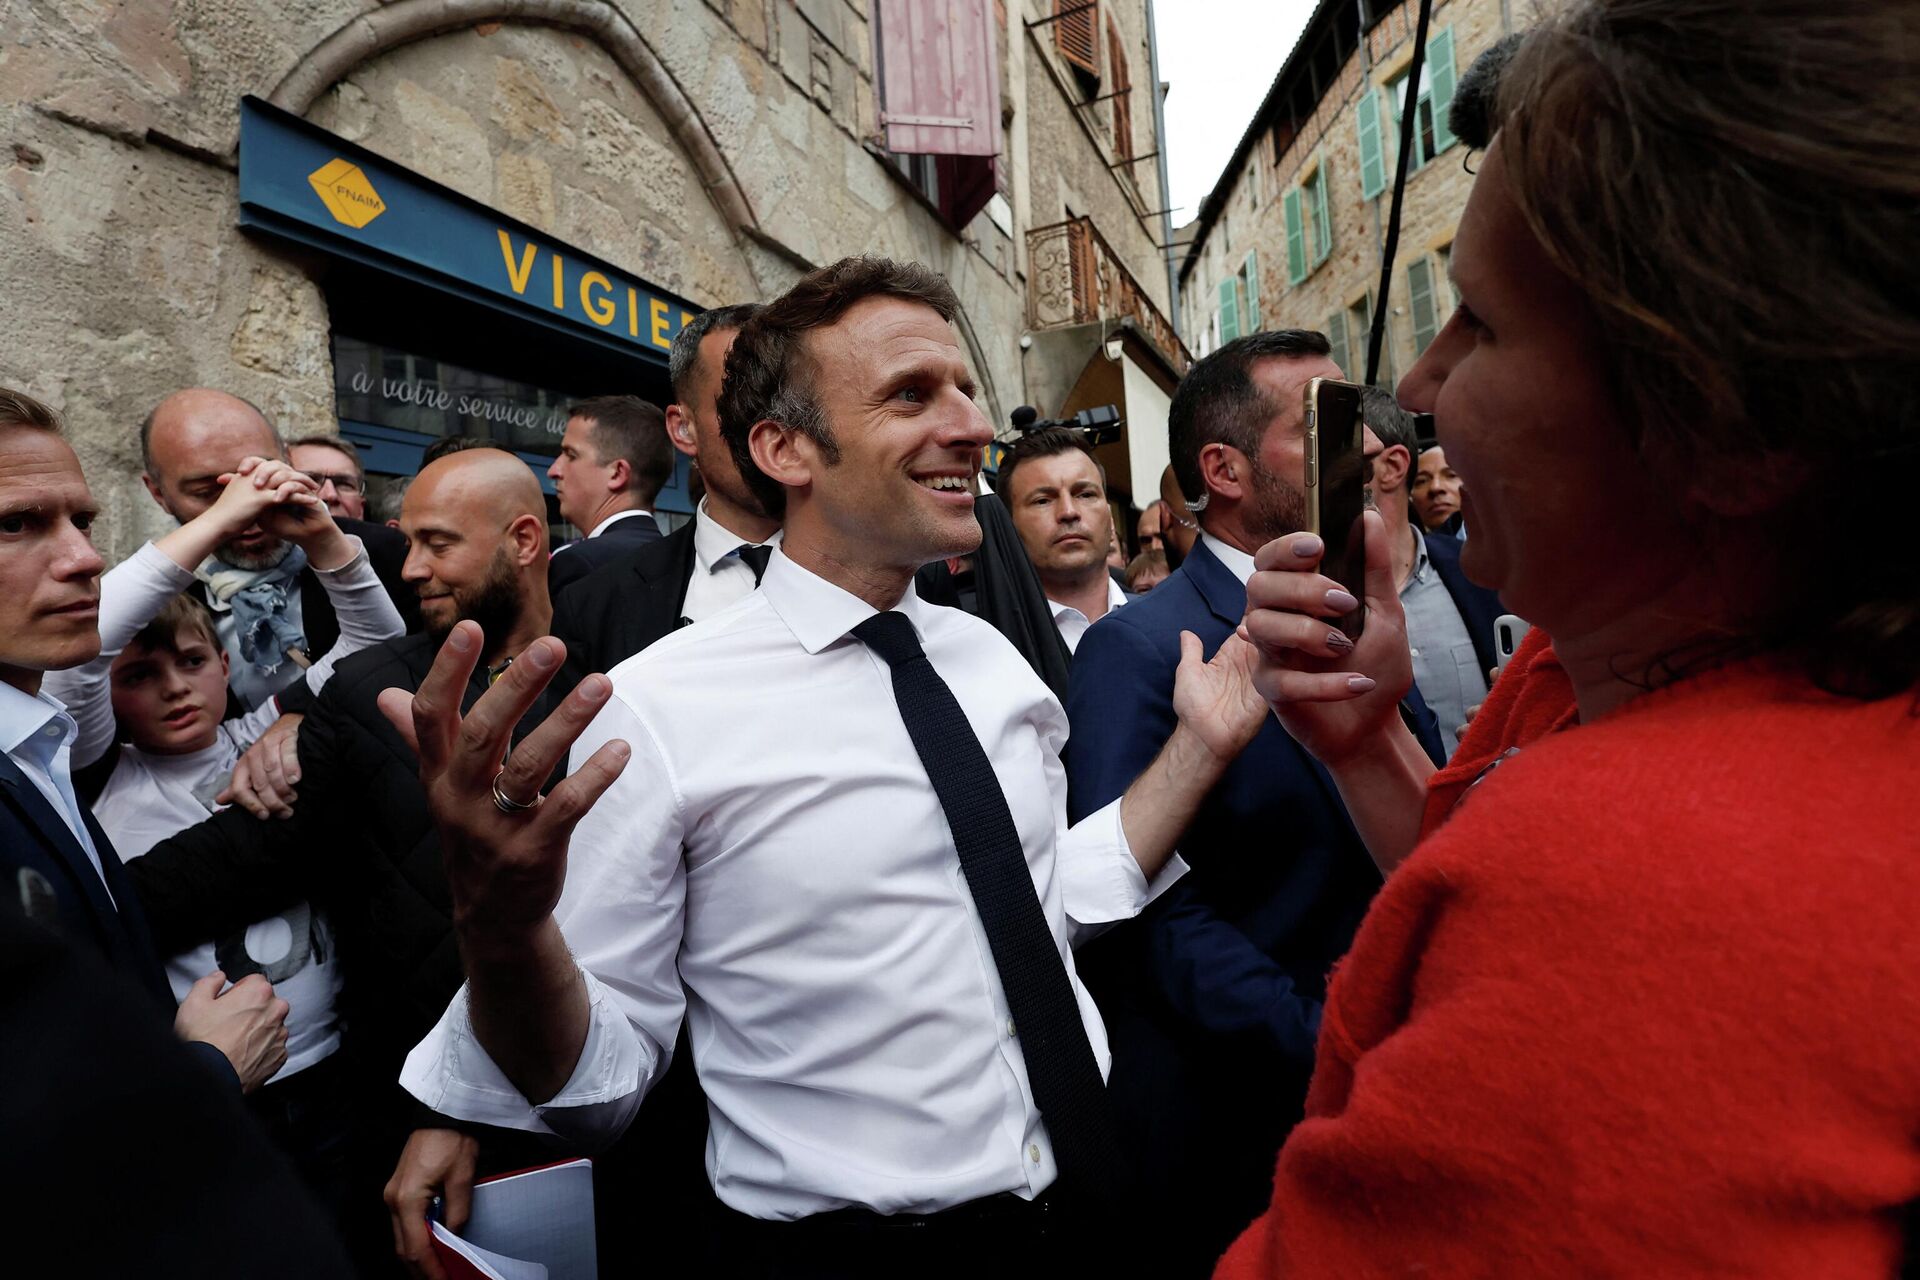 Centrist candidate and French President Emmanuel Macron reacts as he meets residents after a campaign rally Friday, April 22, 2022 in Figeac, southwestern France. Emmanuel Macron is facing off against far-right challenger Marine Le Pen in France's April 24 presidential runoff. - Sputnik International, 1920, 24.04.2022